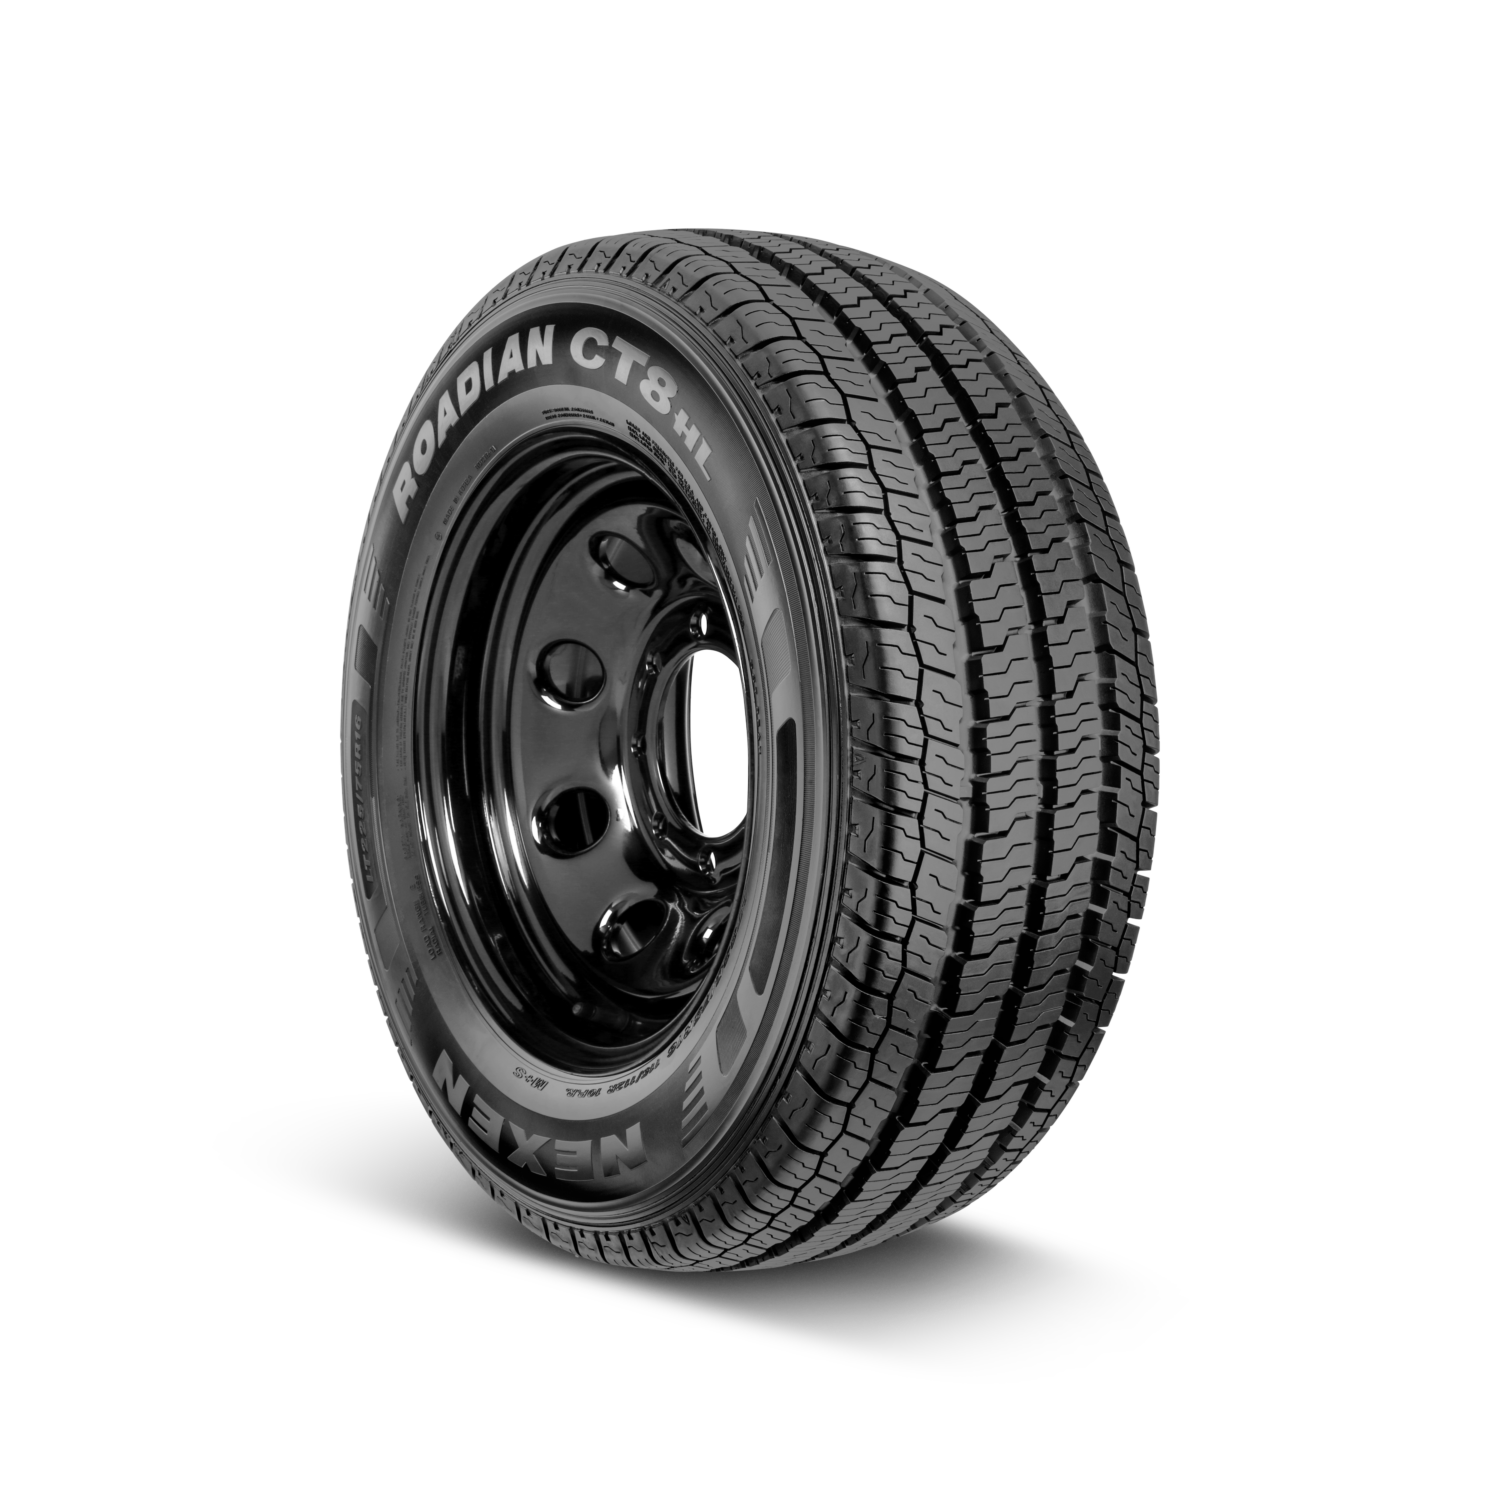 Angle view of NEXEN Roadian CT8 commercial tyre